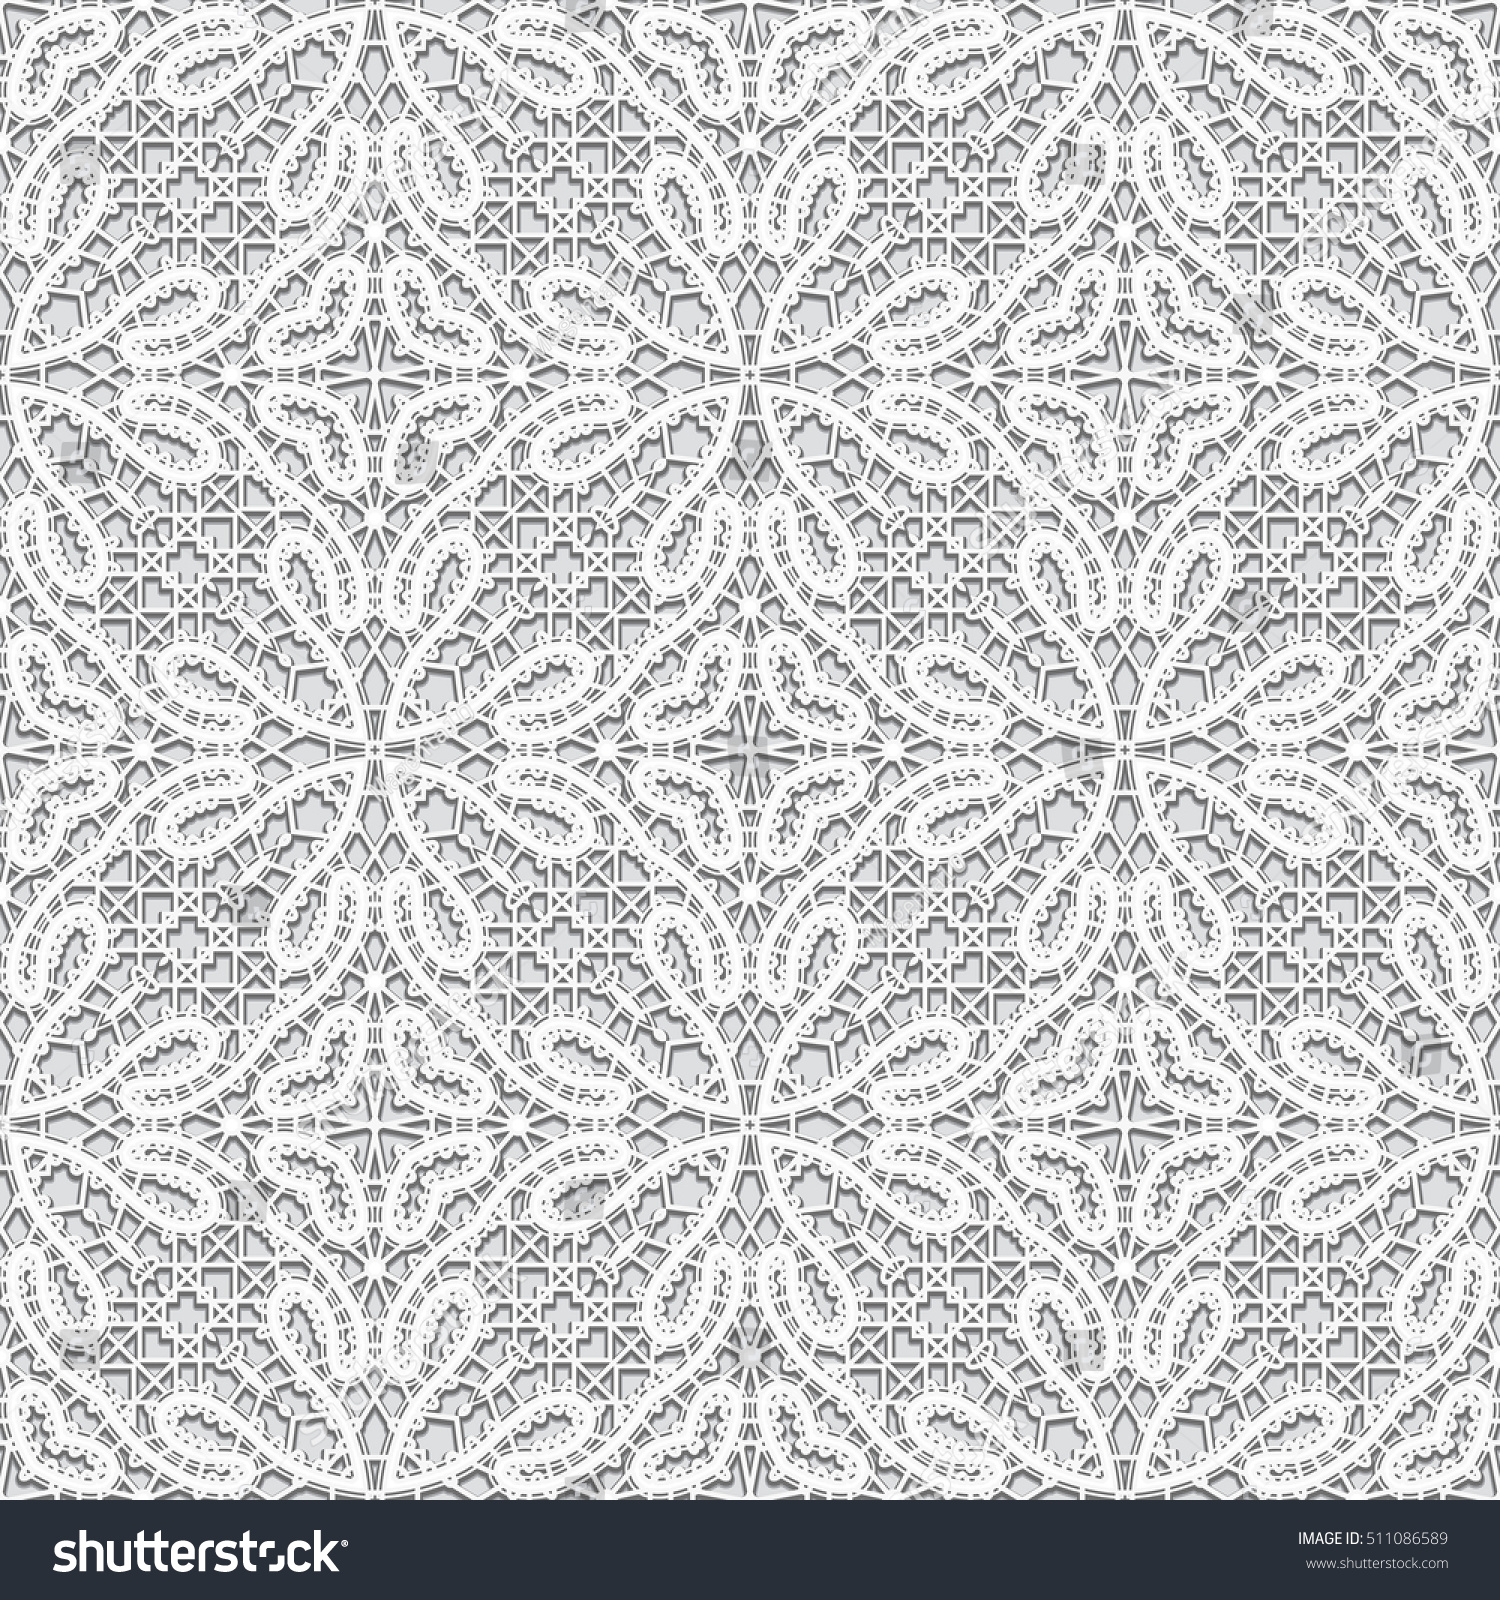 Vintage grey background, handmade tatting lace texture, tulle fabric, crochet ornament, seamless vector pattern #511086589